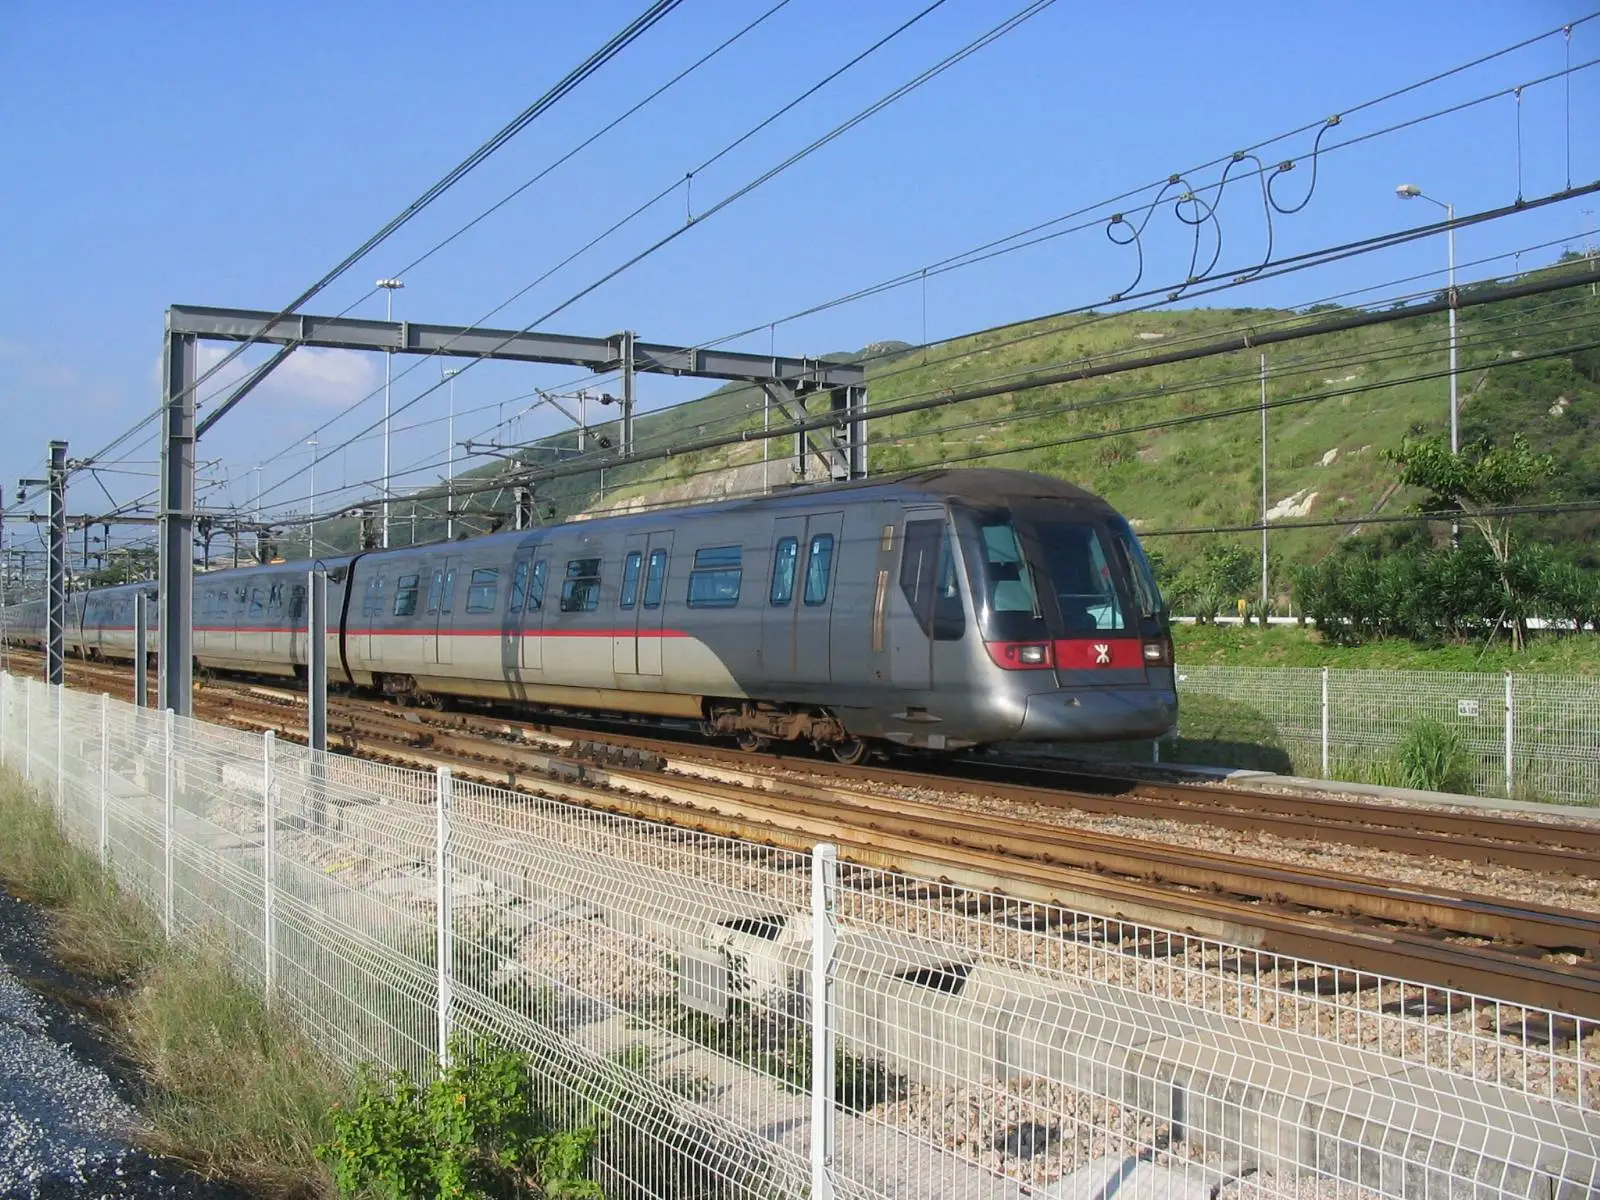 The porn video was filmed on a train believed to be operating on the Tung Chung line of the Hong Kong rapid transit system